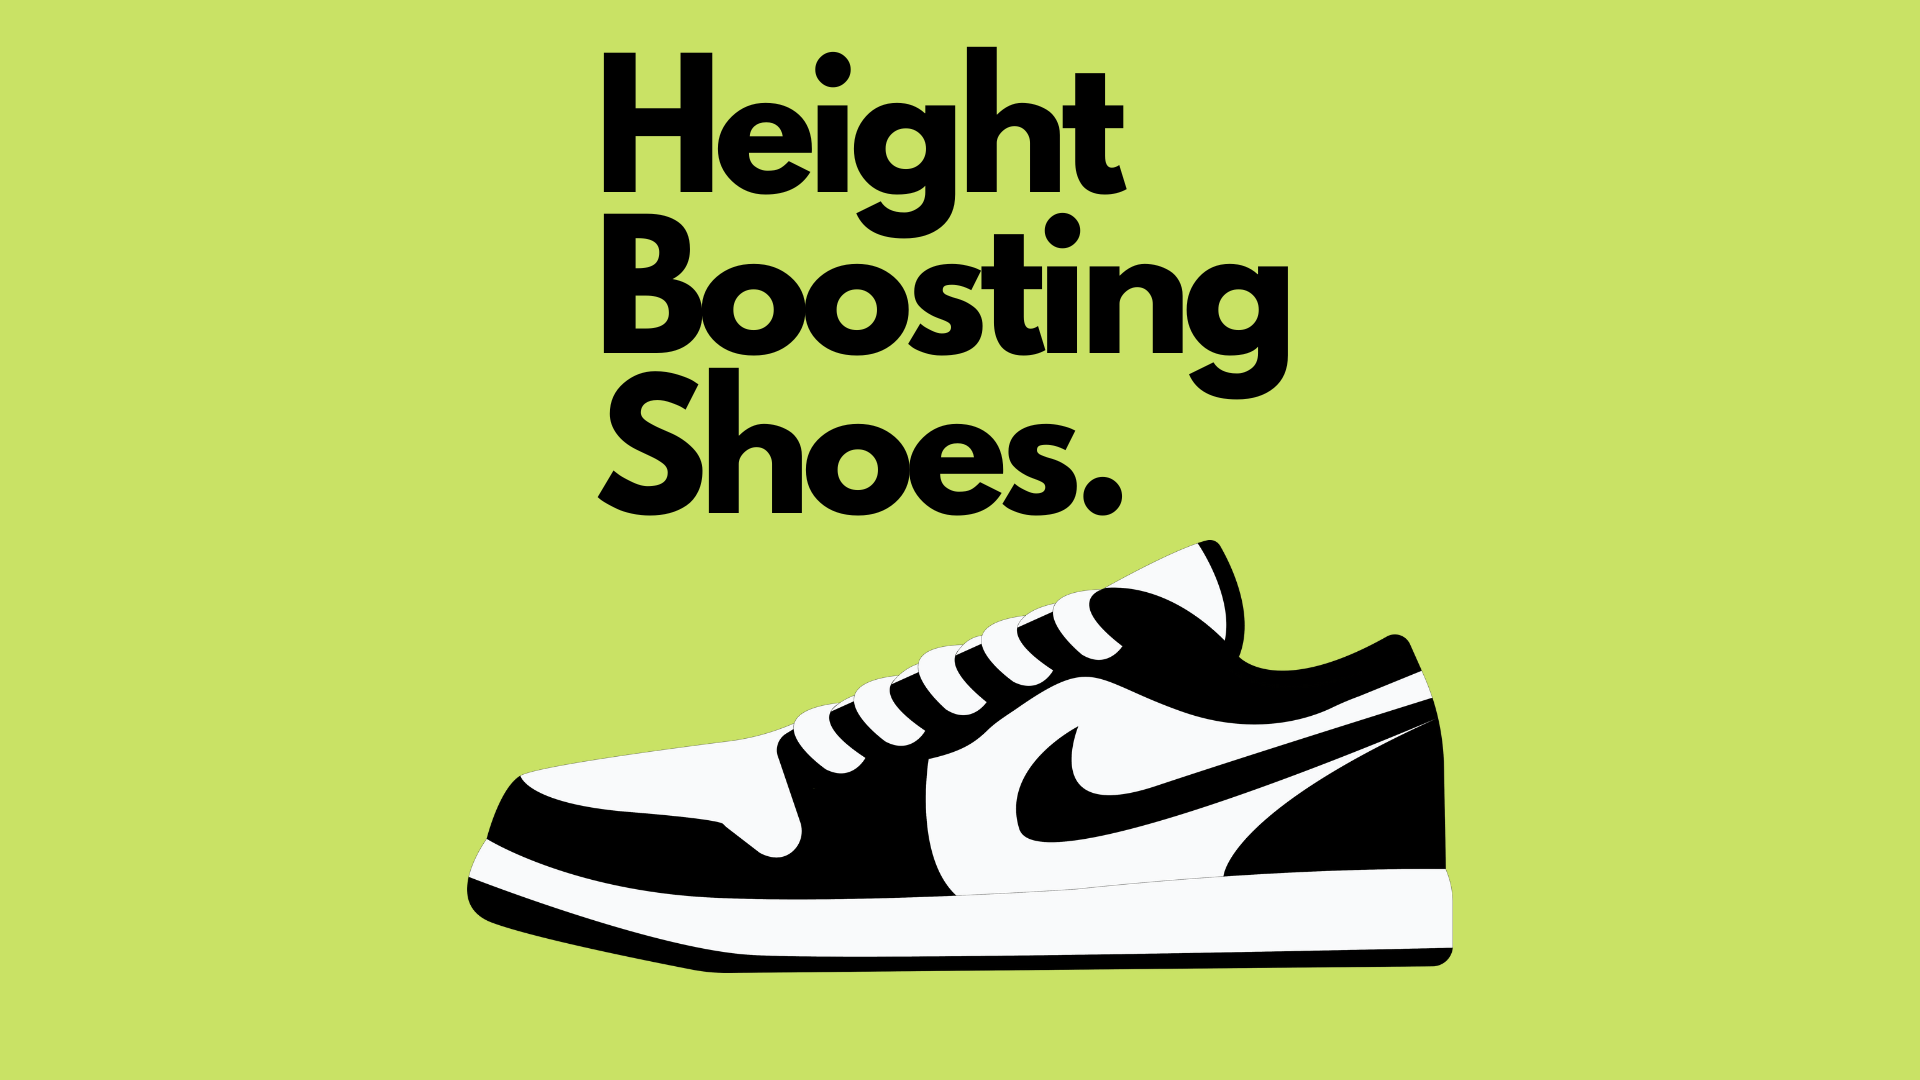 Total 62+ imagen shoes that increase your height